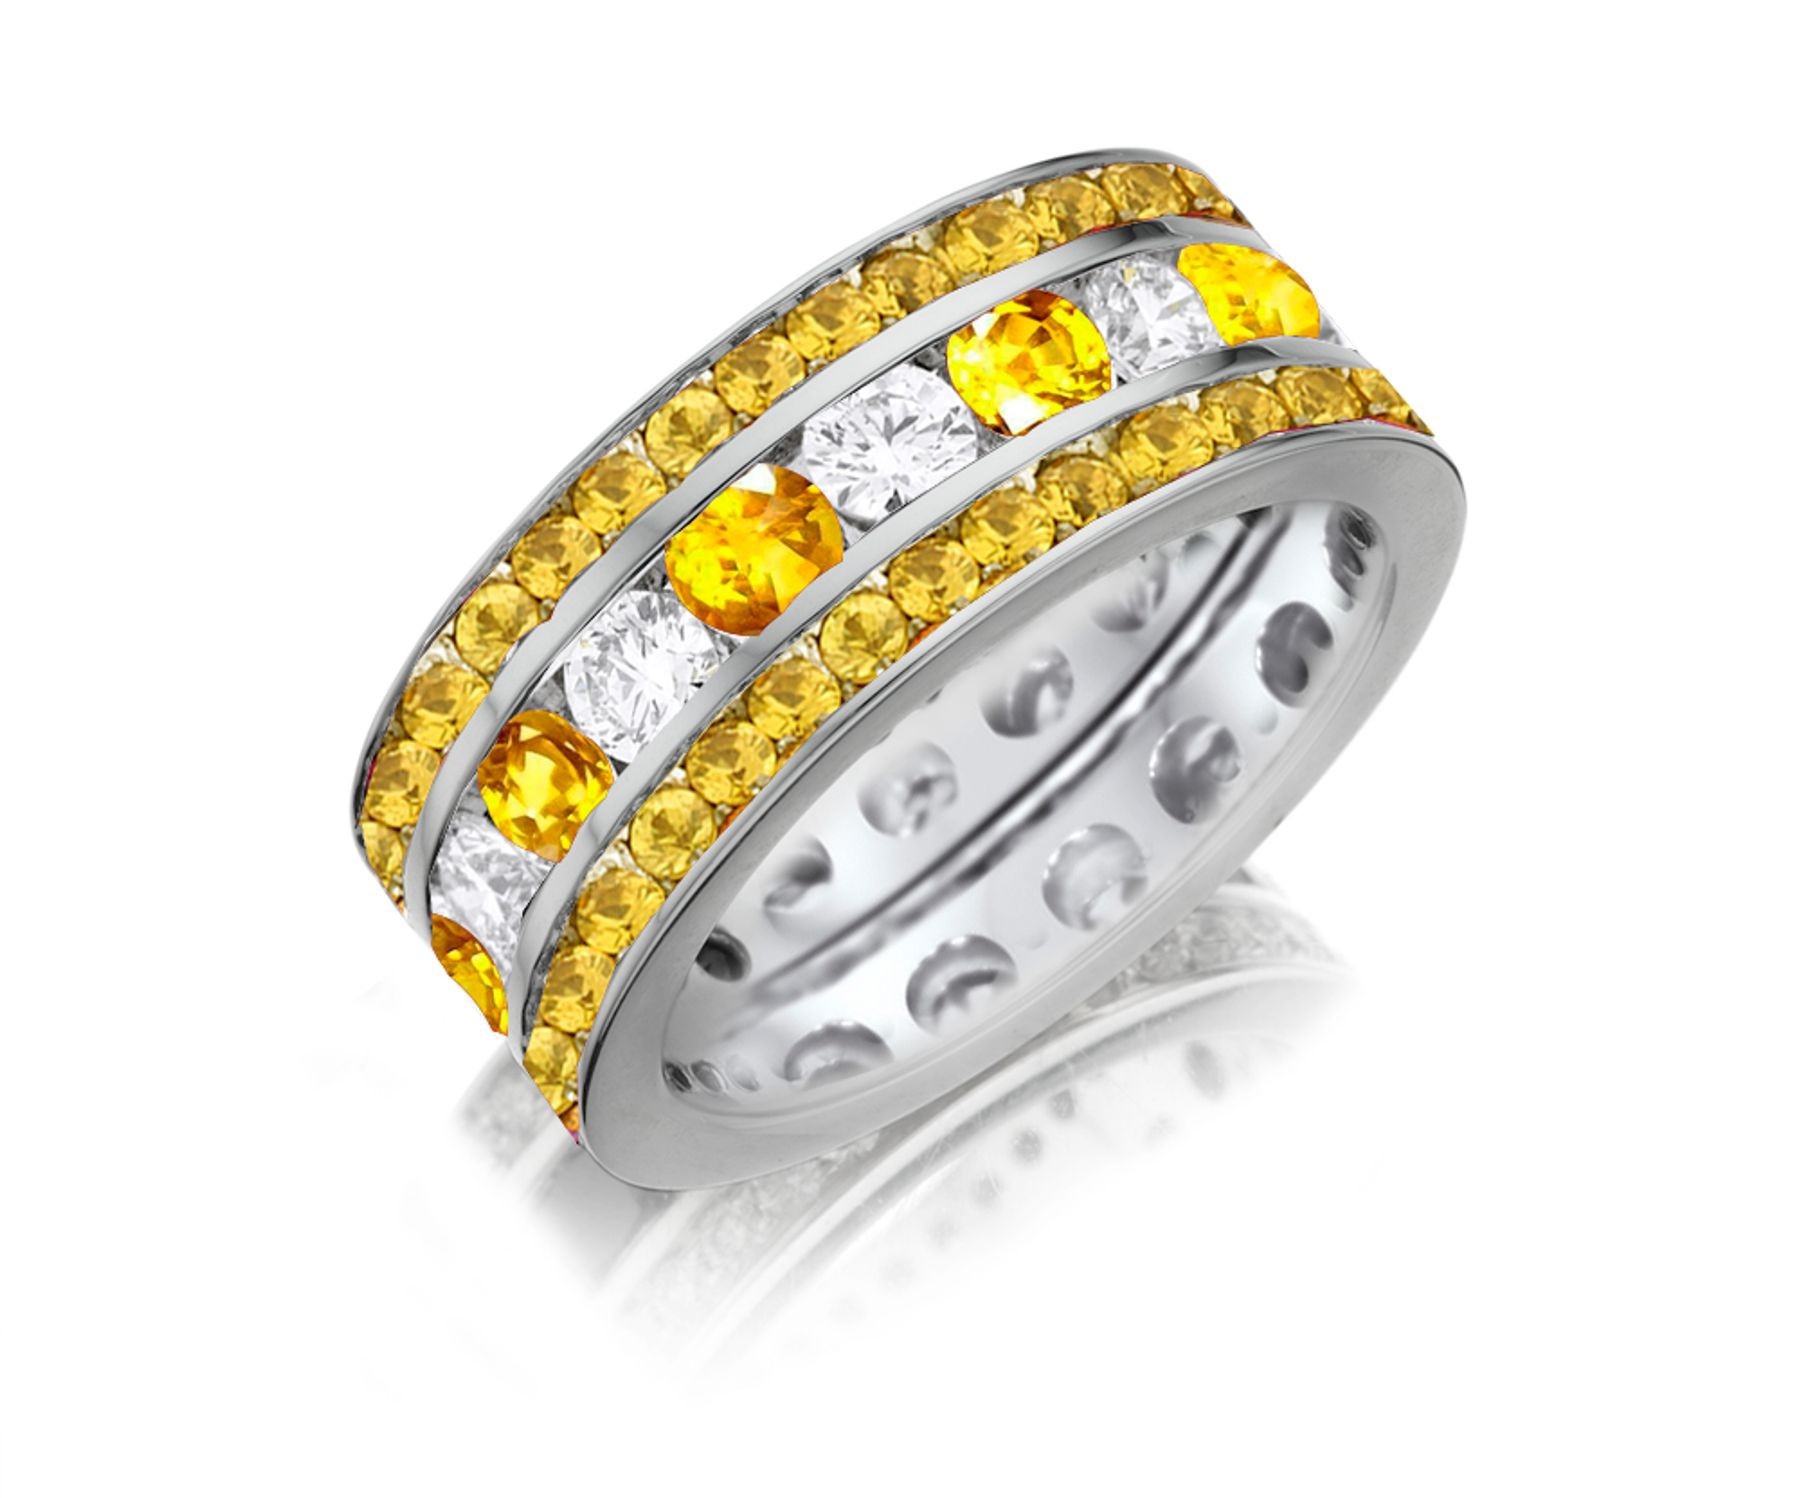 Lifetime of Love Eternity Band Ring With Round Cut Yellow Sapphires & Diamonds